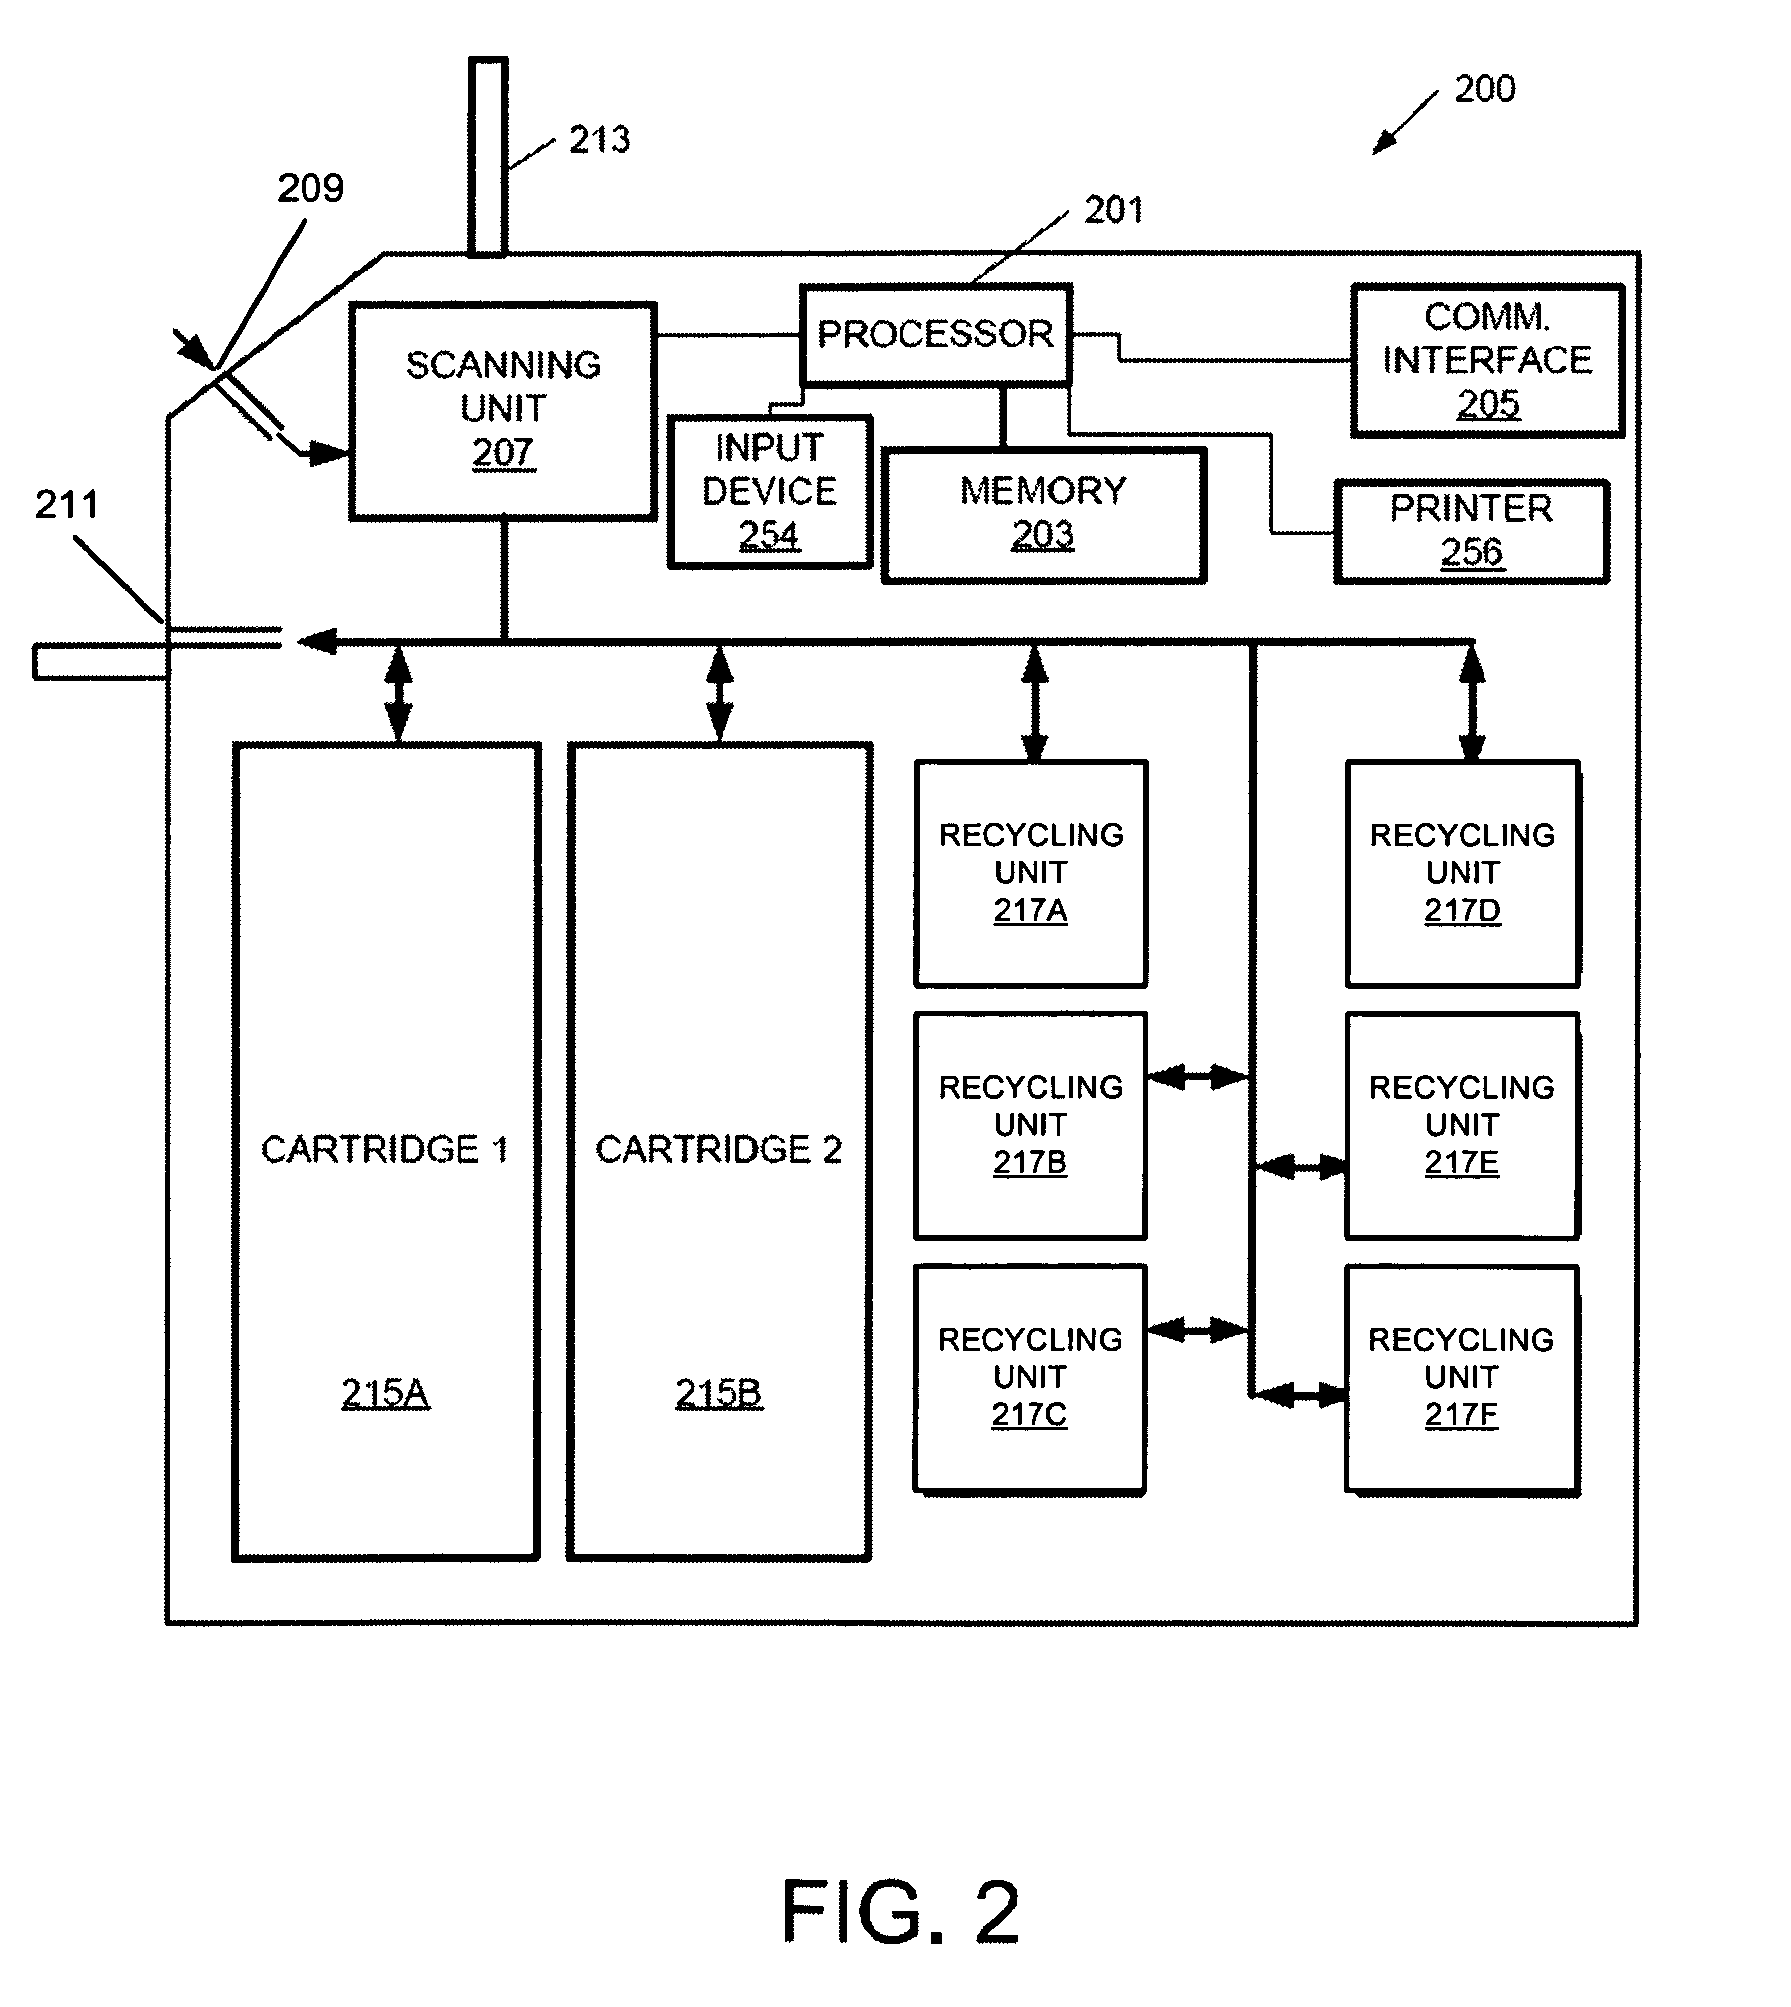 System and method of reconciling currency and coin in a cash handling device